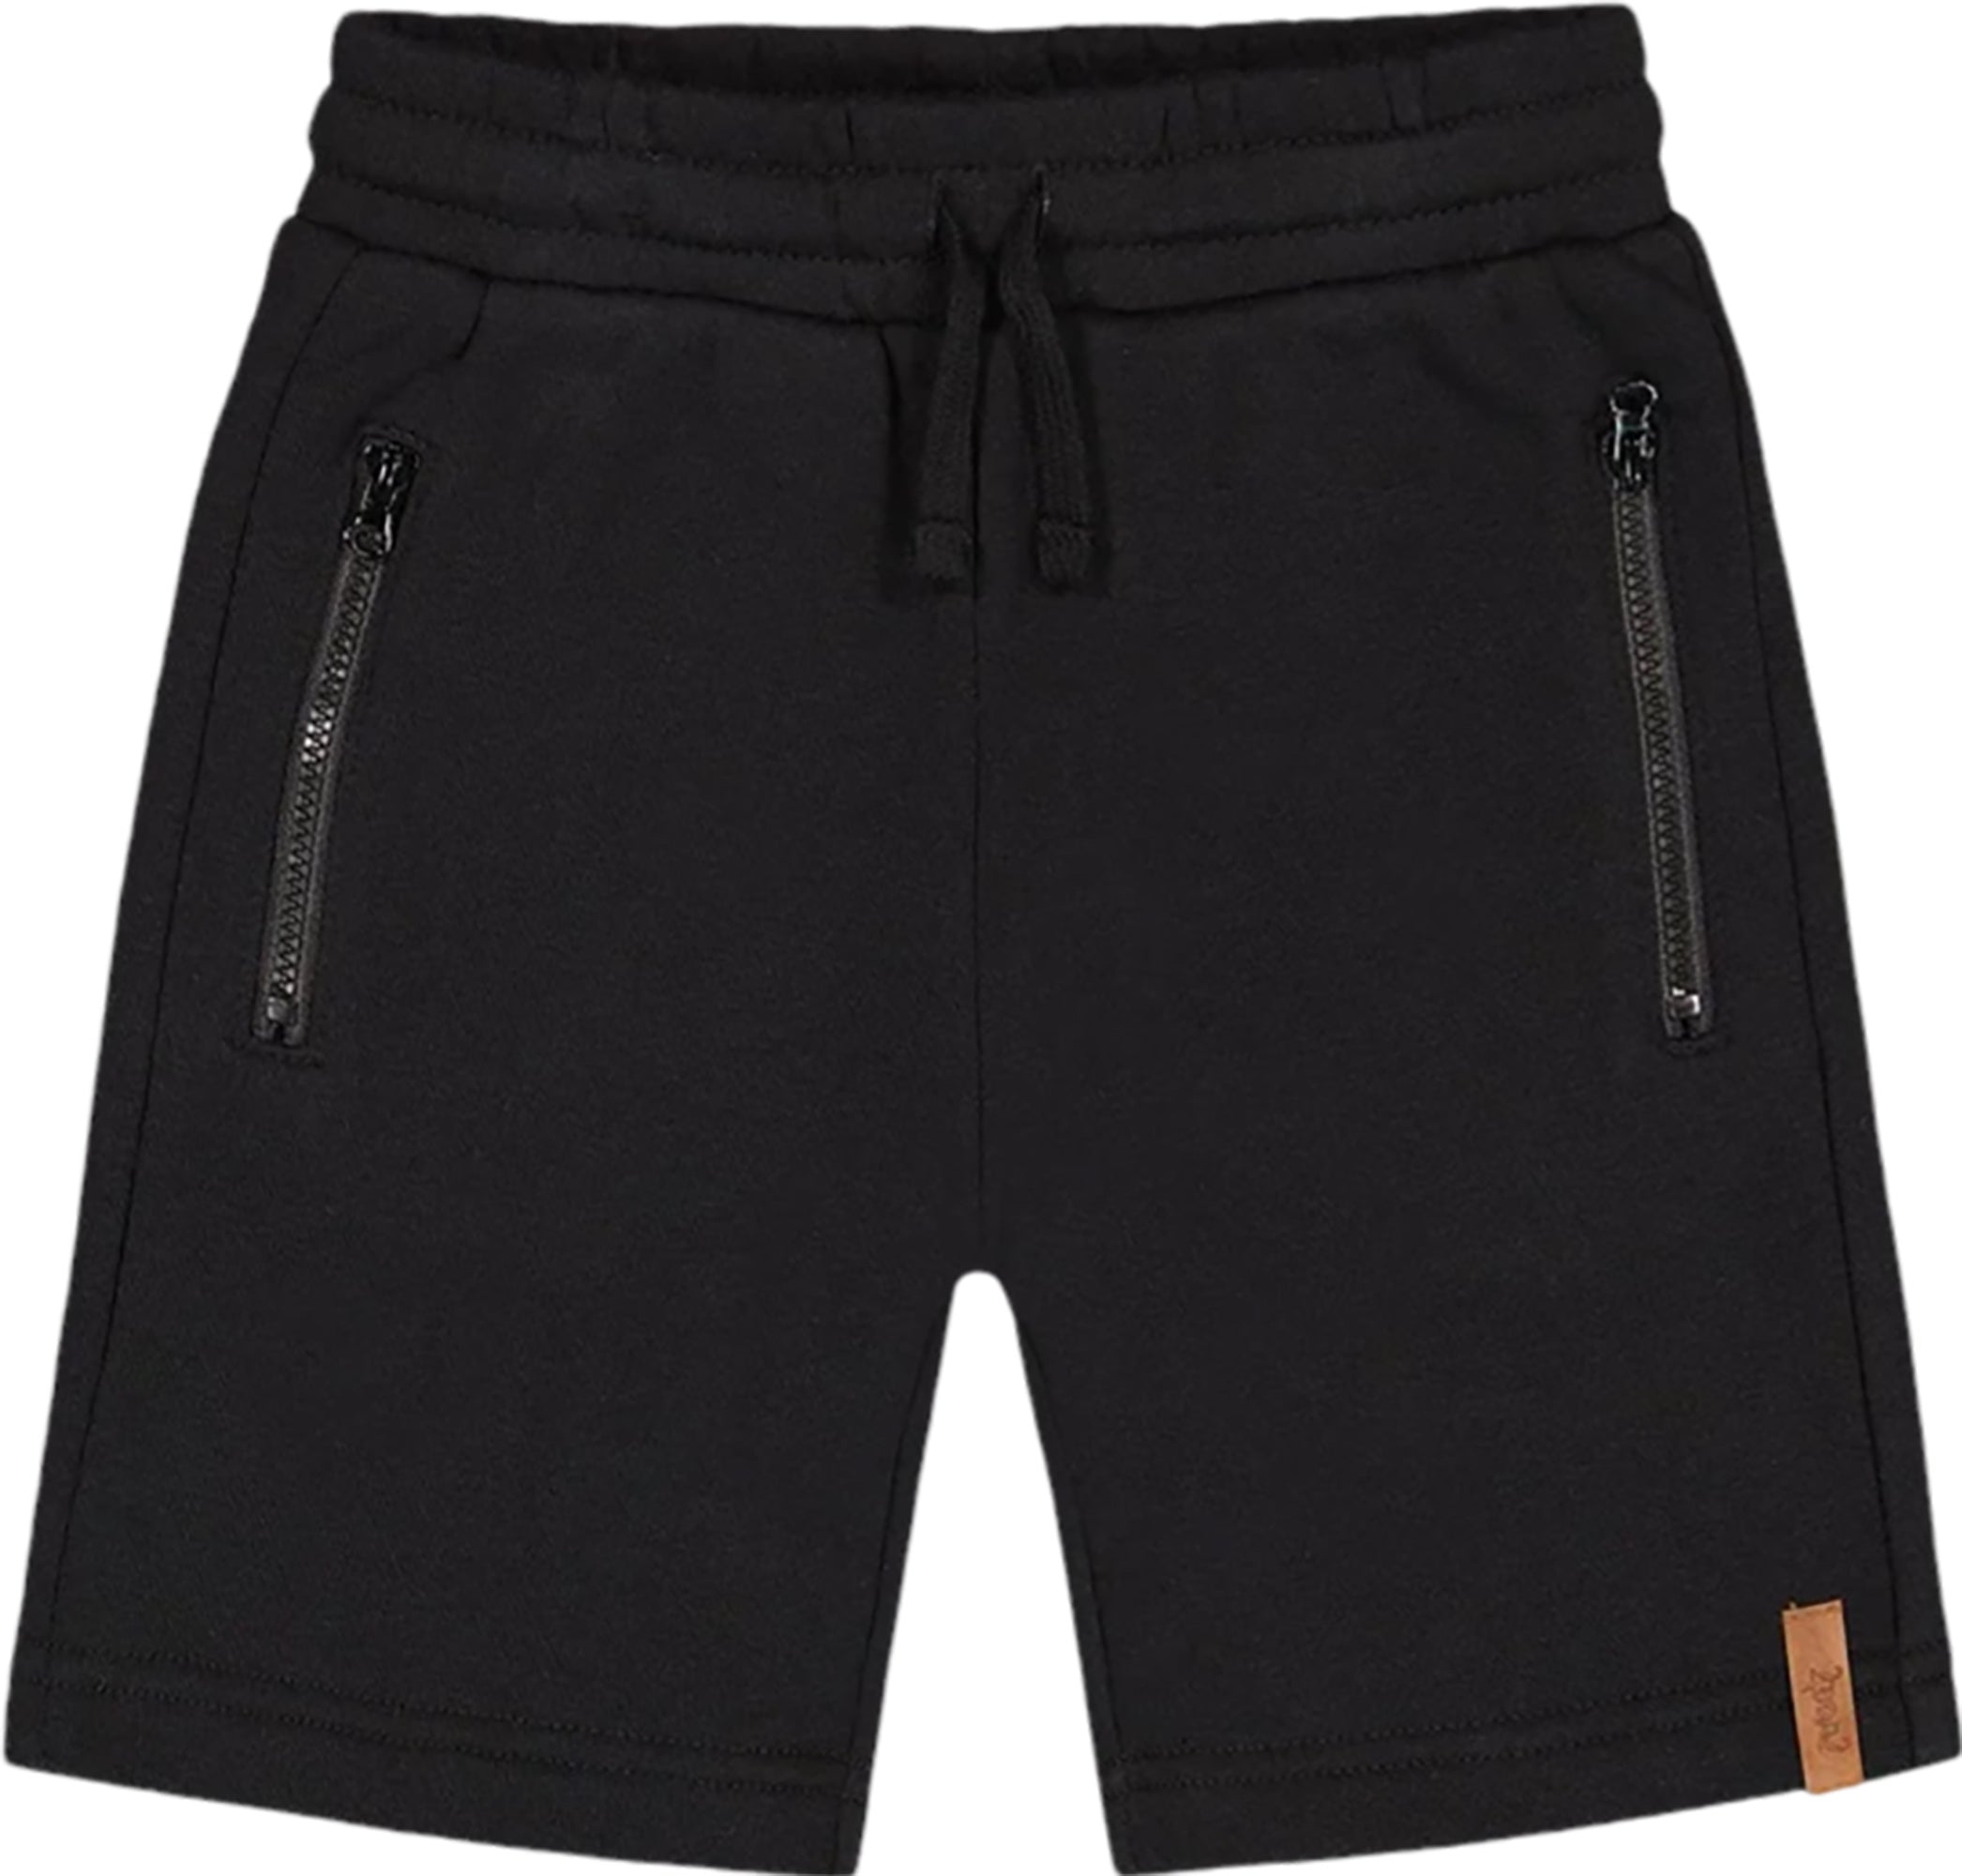 New Bench French Terry Shorts for your dad or daddy! $17.99 each spot